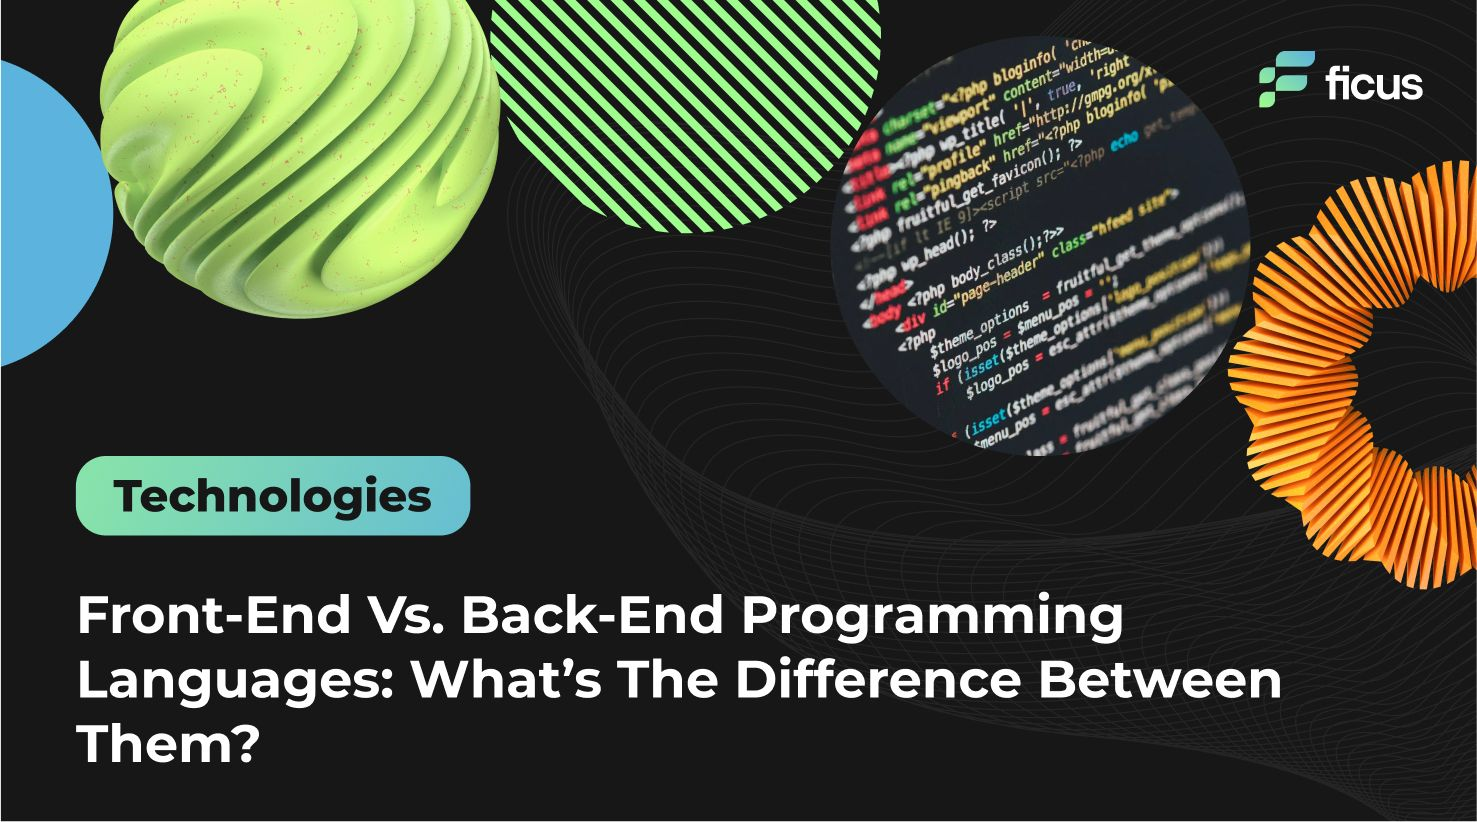 Front-End Vs. Back-End Programming Languages: What’s The Difference Between Them?